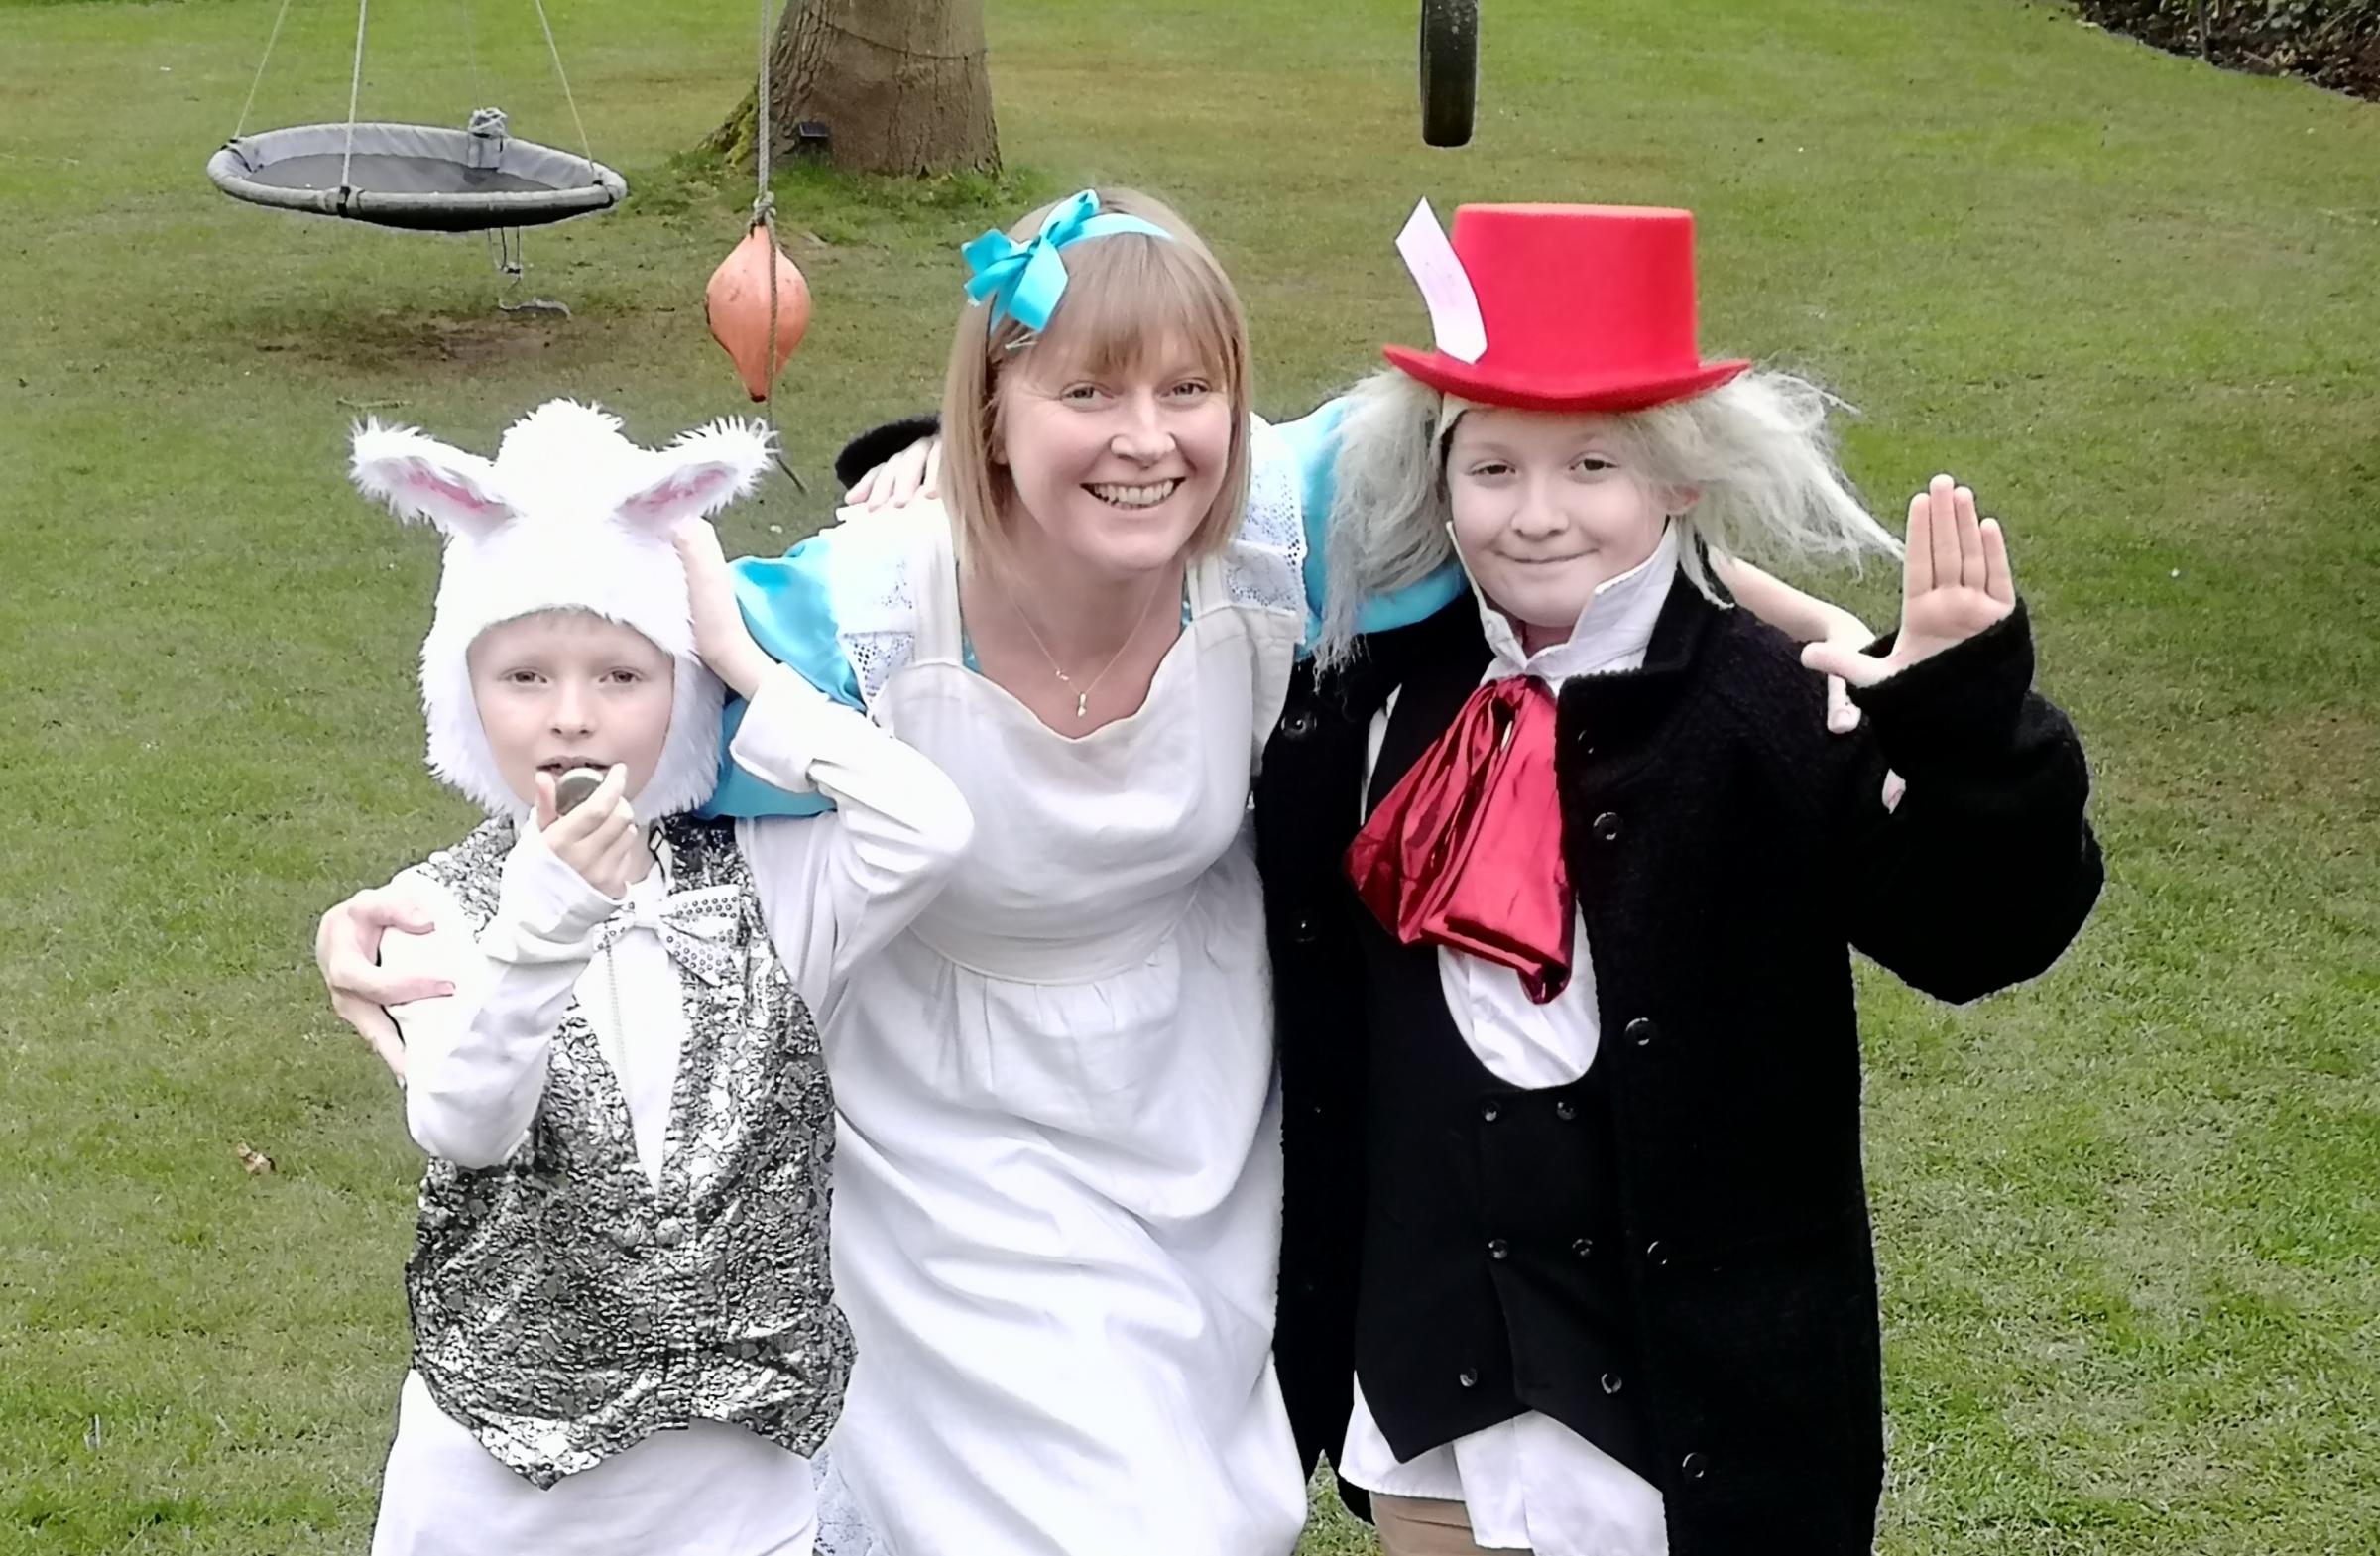 Isle of Wight County Press: Alice in Wonderland comes to life, Croquet, Rose painting and a tea party galore!